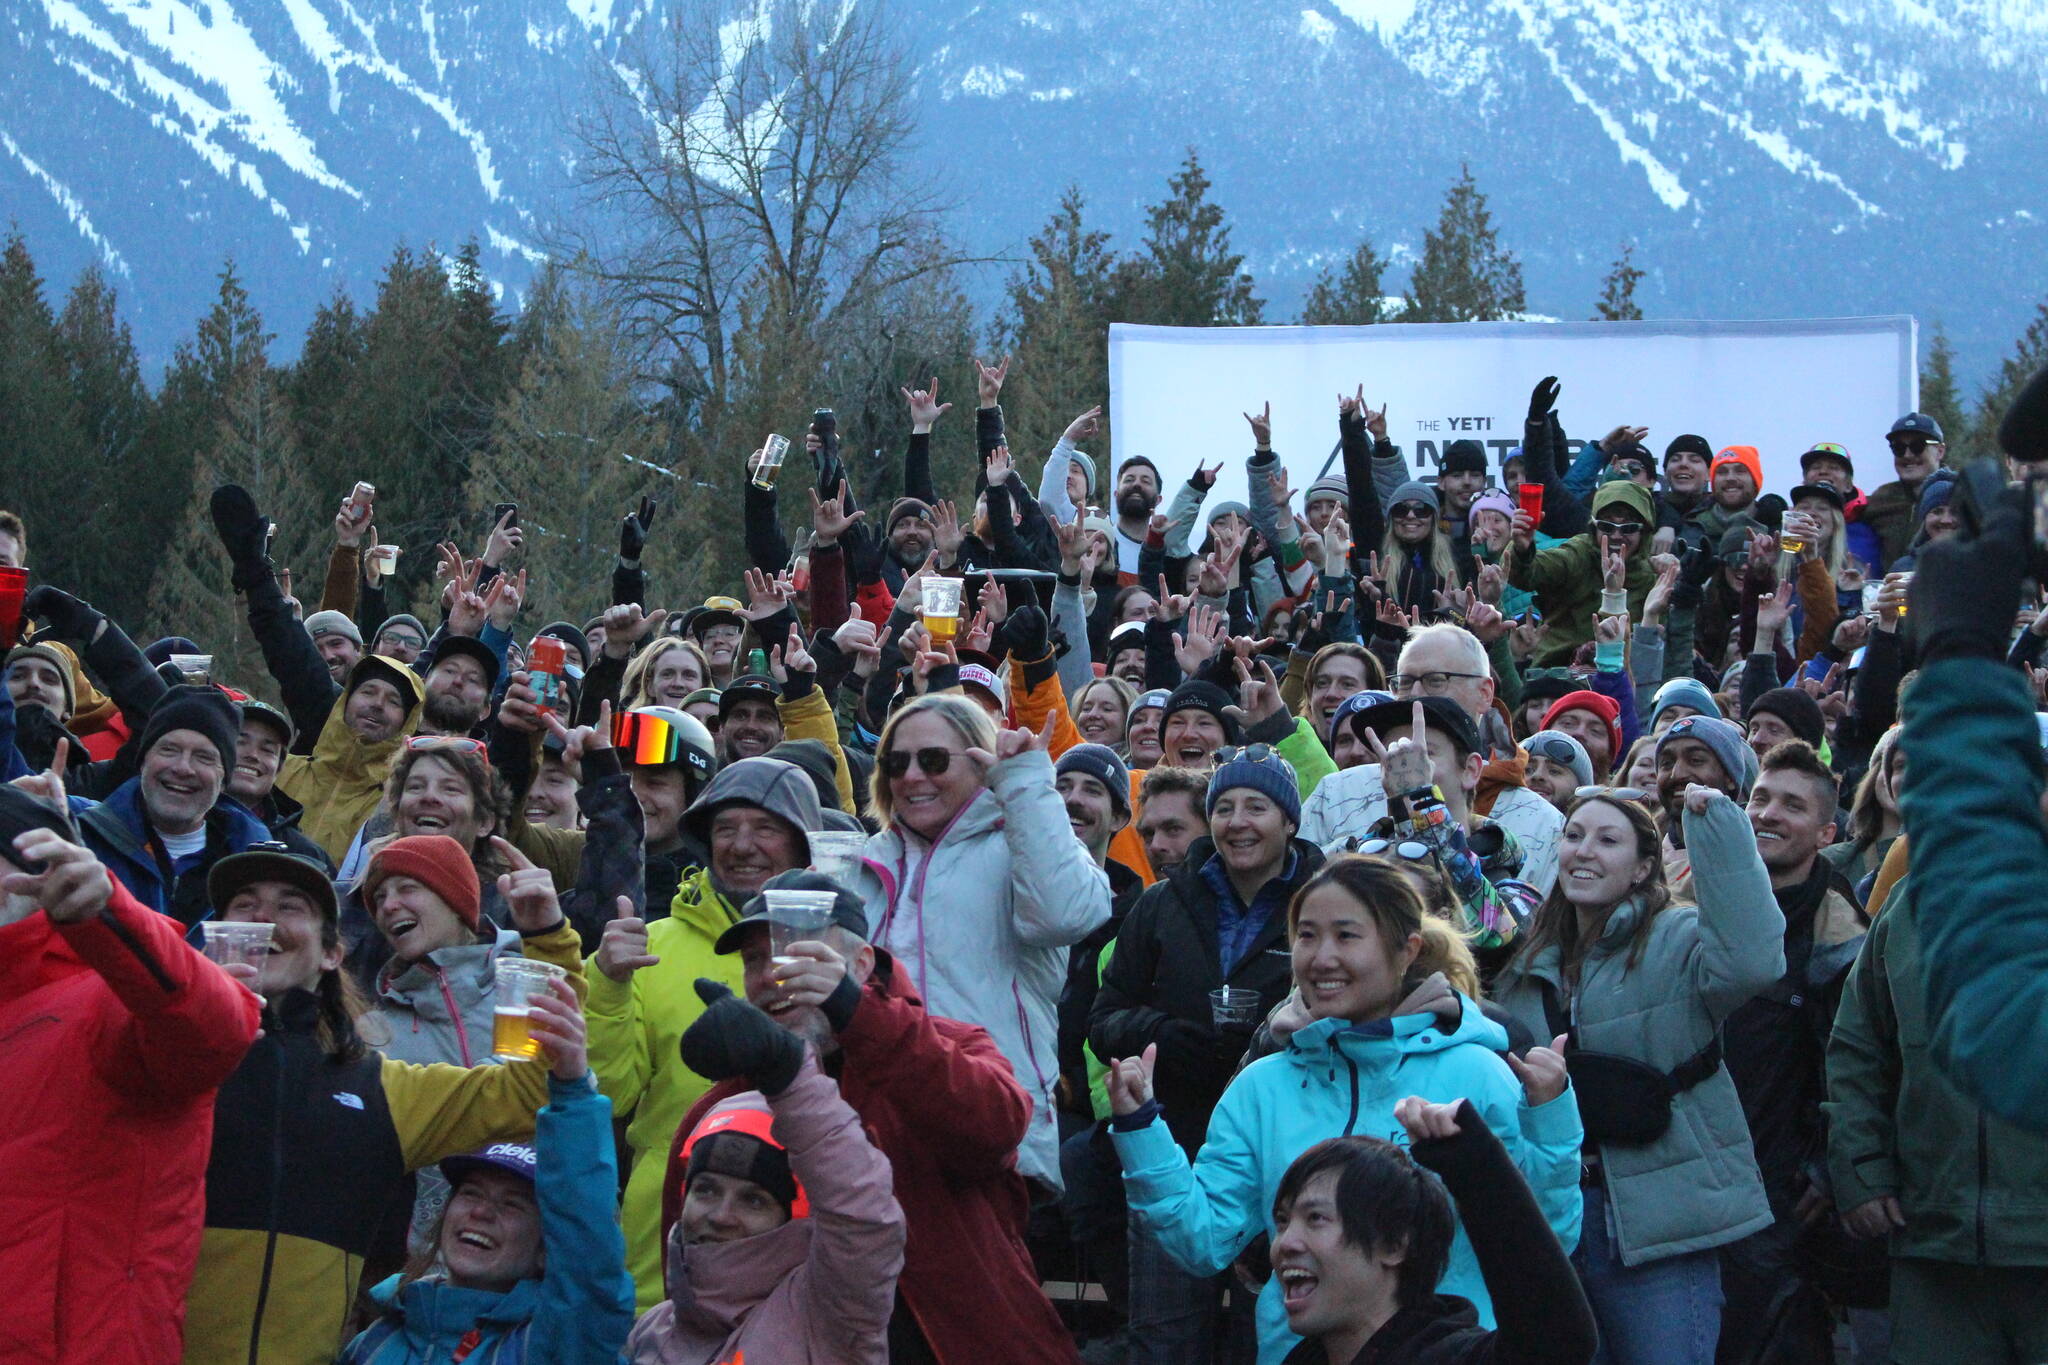 The crowd with the athletes at Rockford Plaza on Mar. 8. (Josh Piercey/Revelstoke Review)